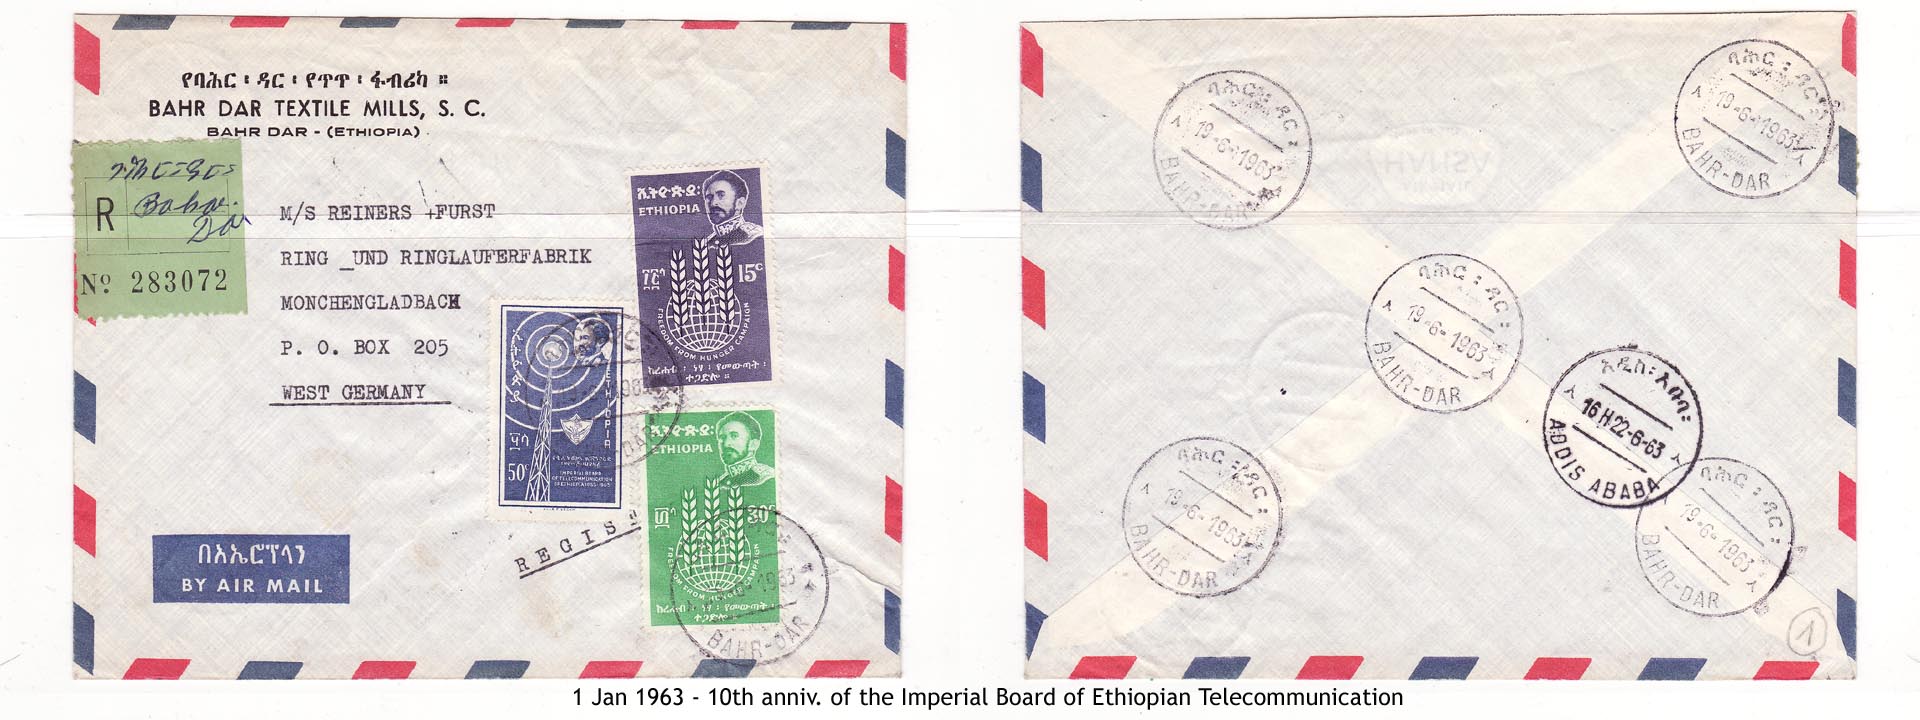 19630101 – 10th anniv. of the Imperial Board of Ethiopian Telecommunication